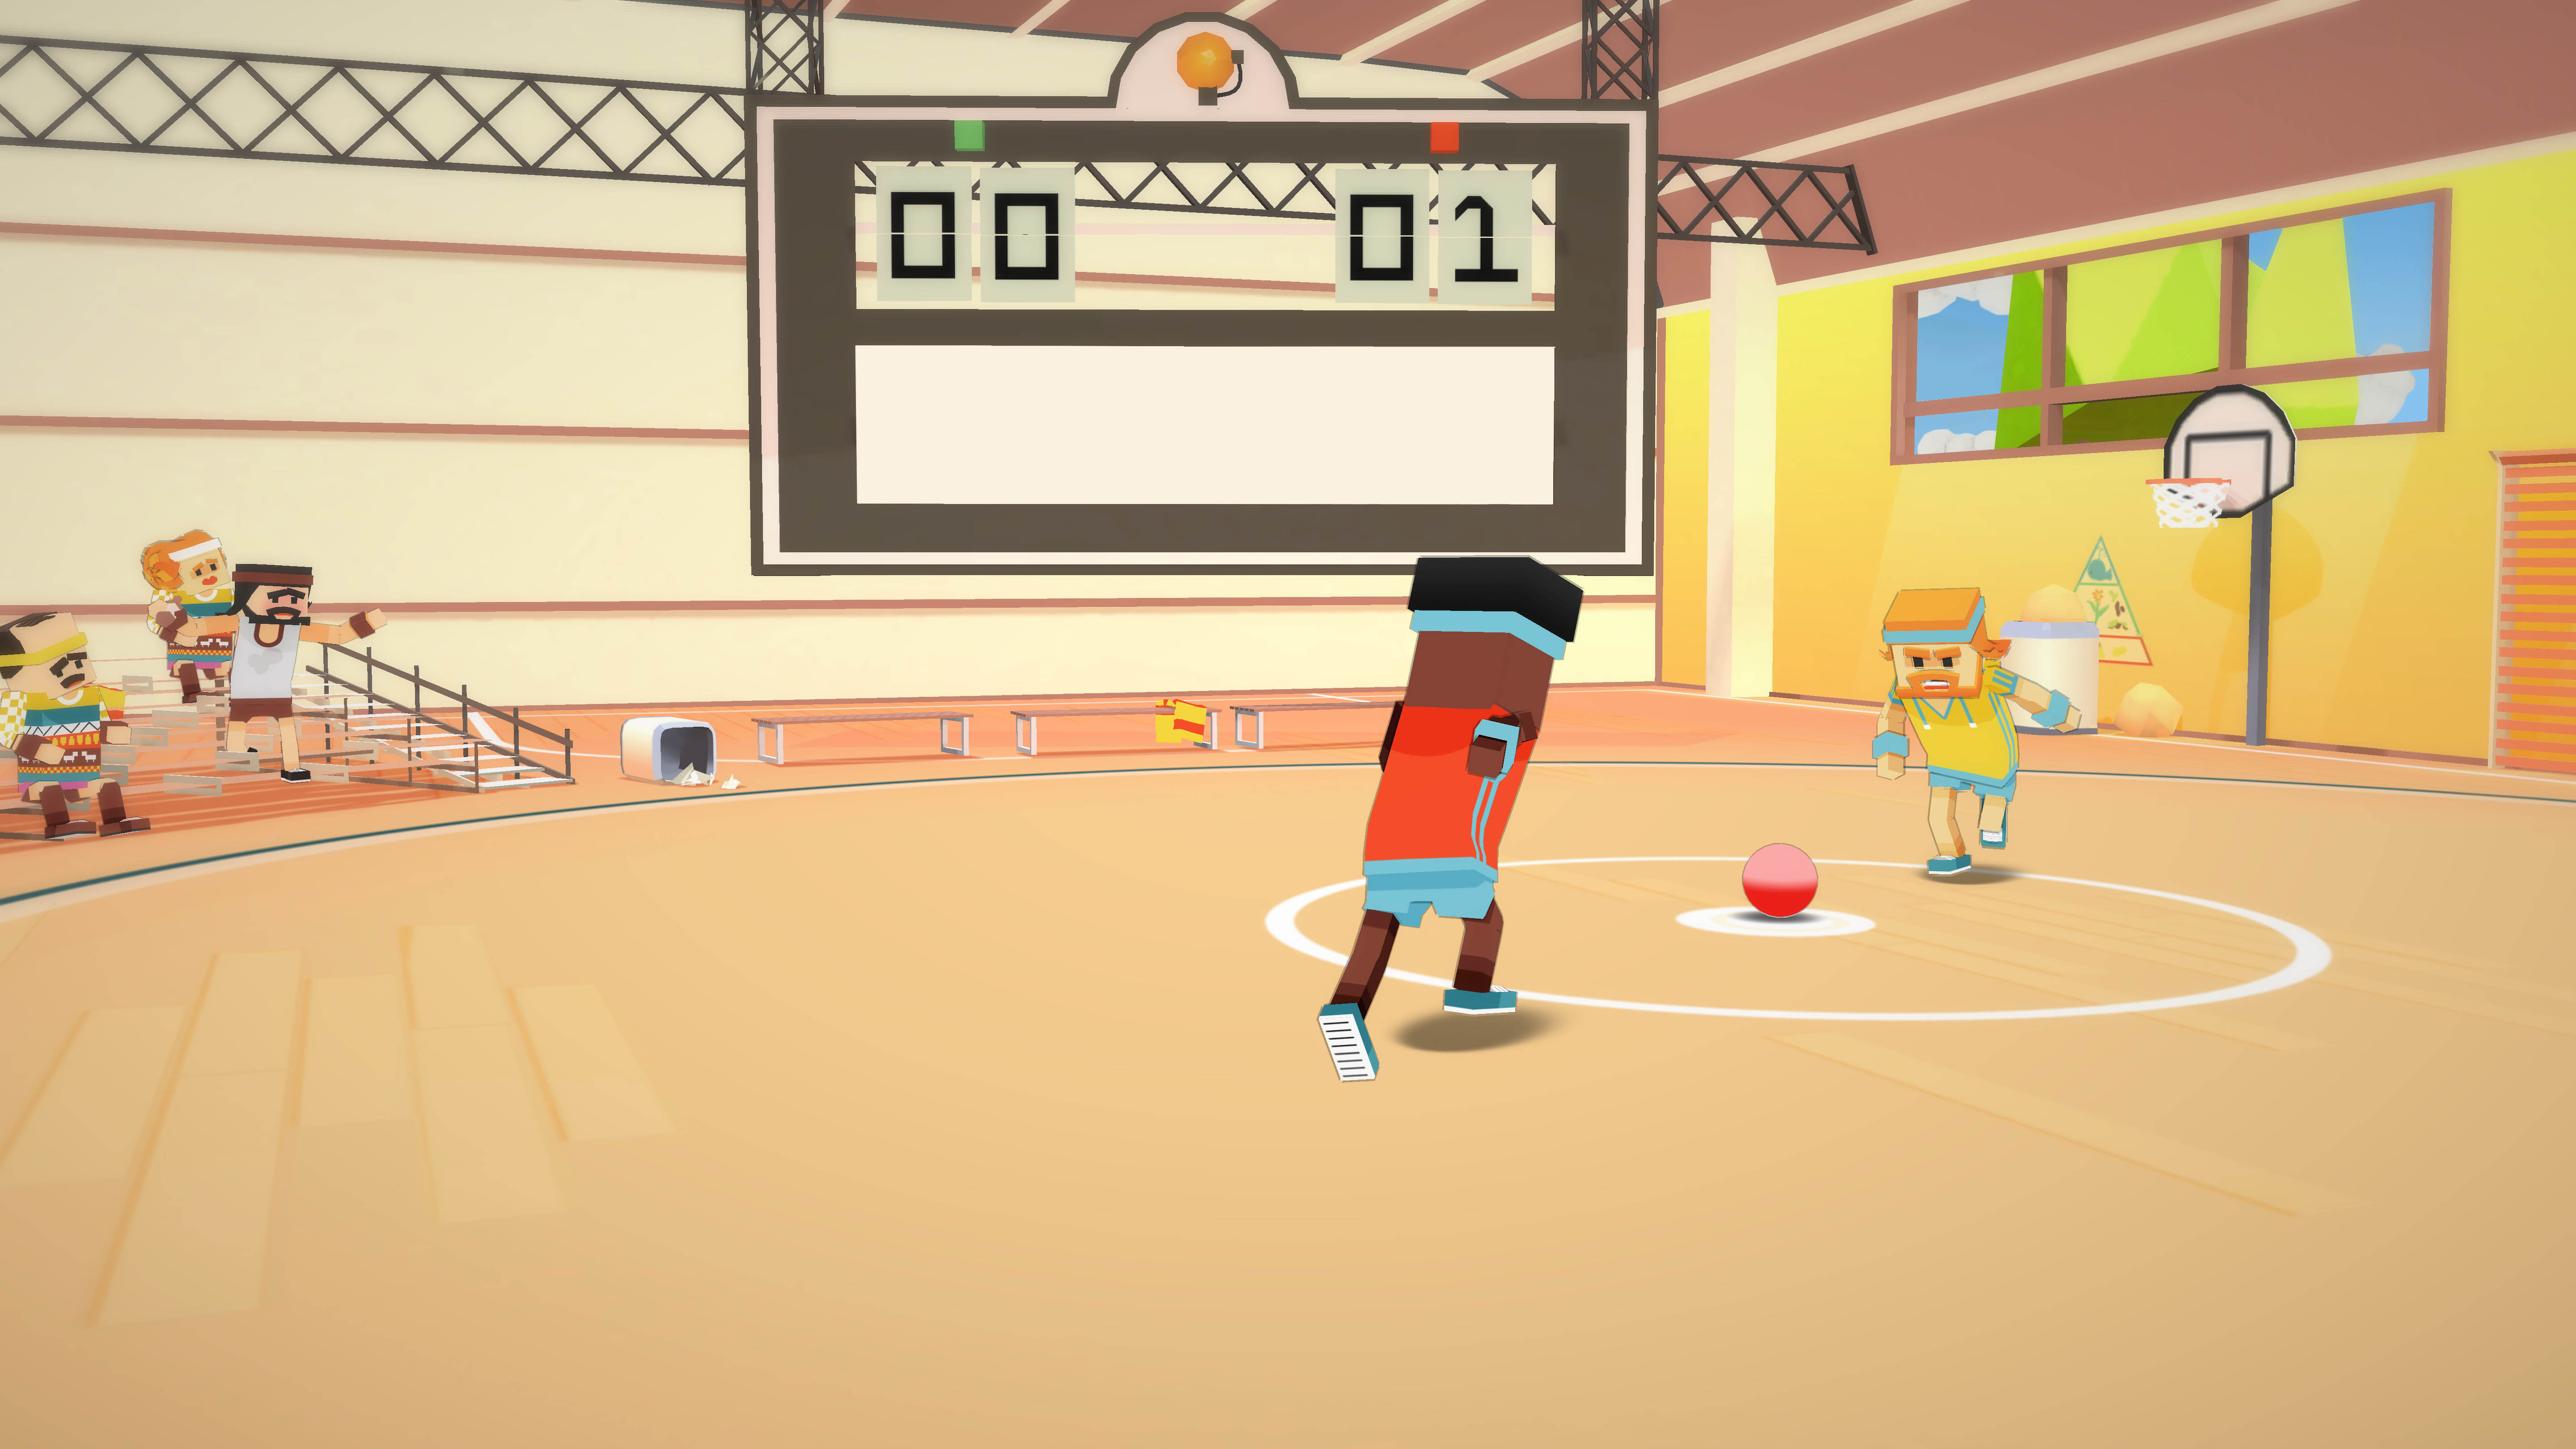 Stikbold! A Dodgeball Adventure Hit with your best XBLAFans